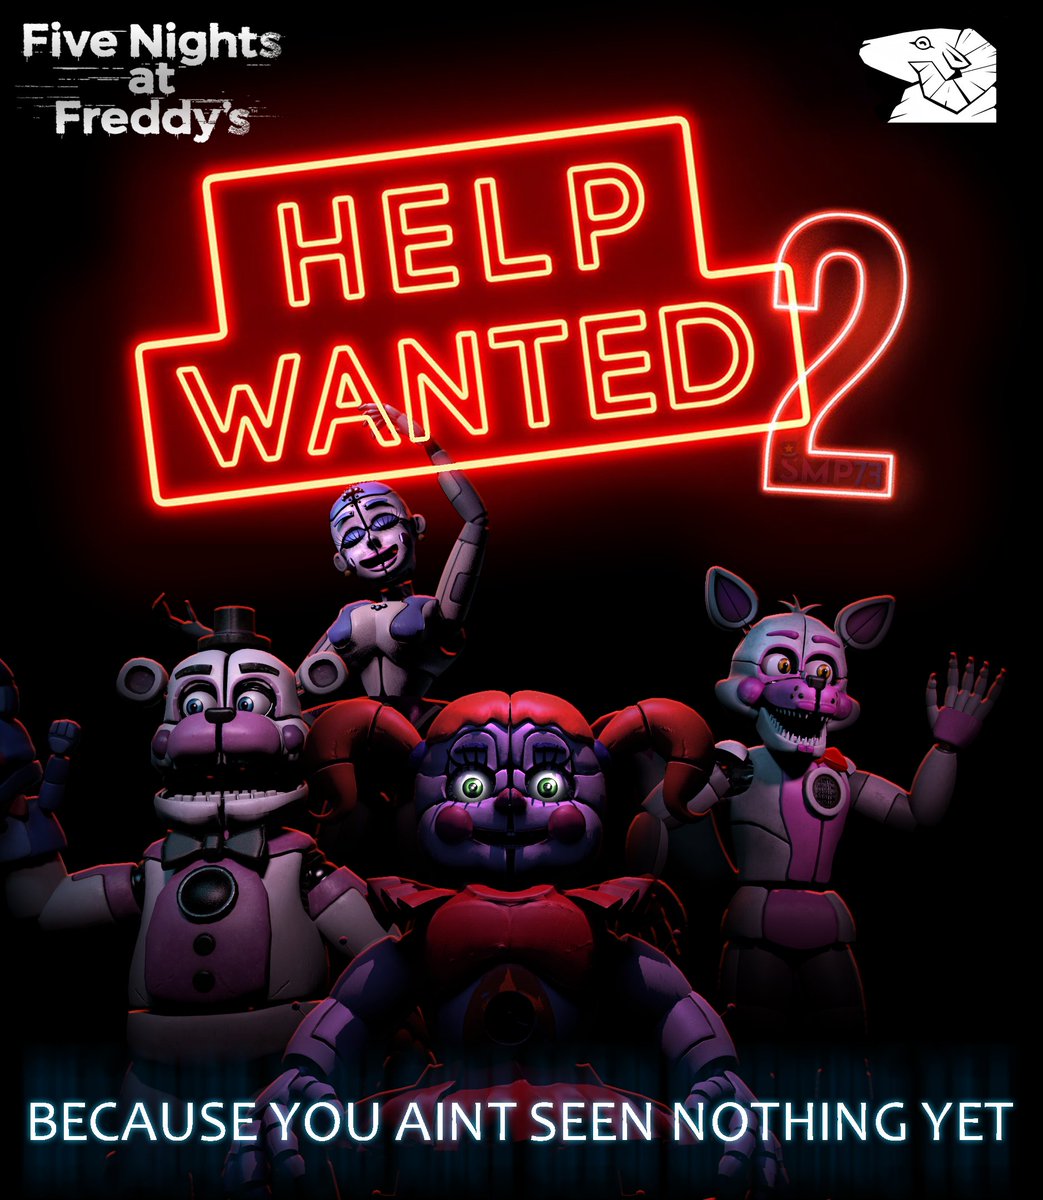 'So strap yourself in and get motivated to an appropriate degree. Because you ain't seen nothing yet!'

#FNAF #FiveNightsAtFreddys #HelpWanted2 #steelwoolstudios